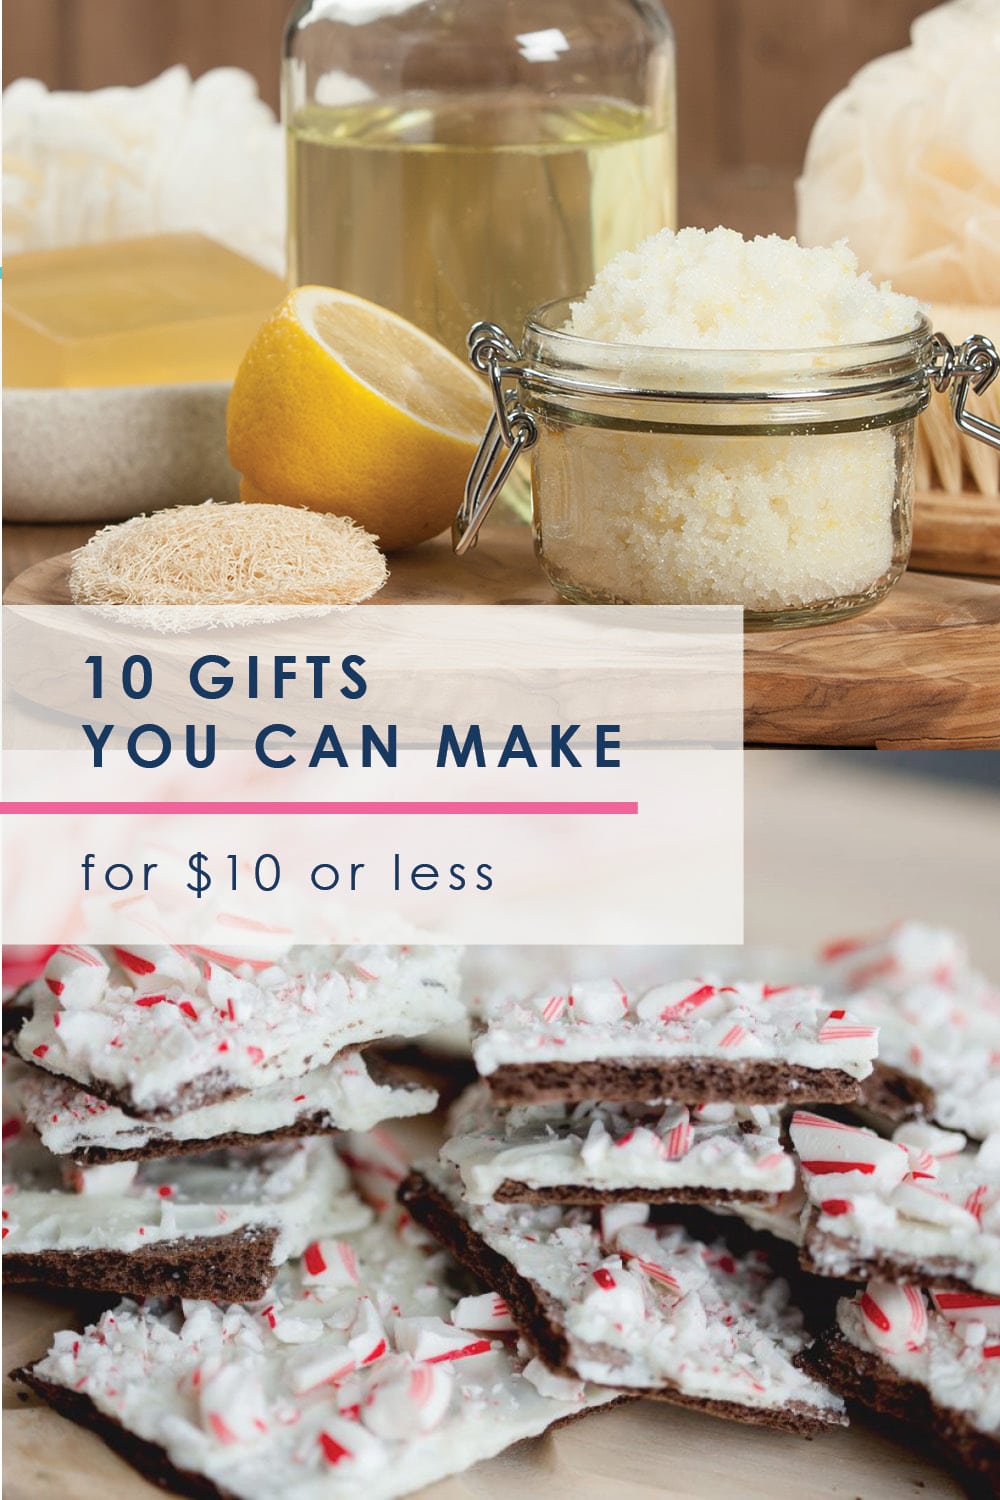 Does your gift list exceed your budget this year? No worries--we have got you covered. Don't miss these 10 super easy (really!) gifts you can make for $10 or less! #diy #homemade #diygifts #holidays #thrifty #handmade #frugalgifts #budgetfriendlygifts #handmadegifts #cheapgifts